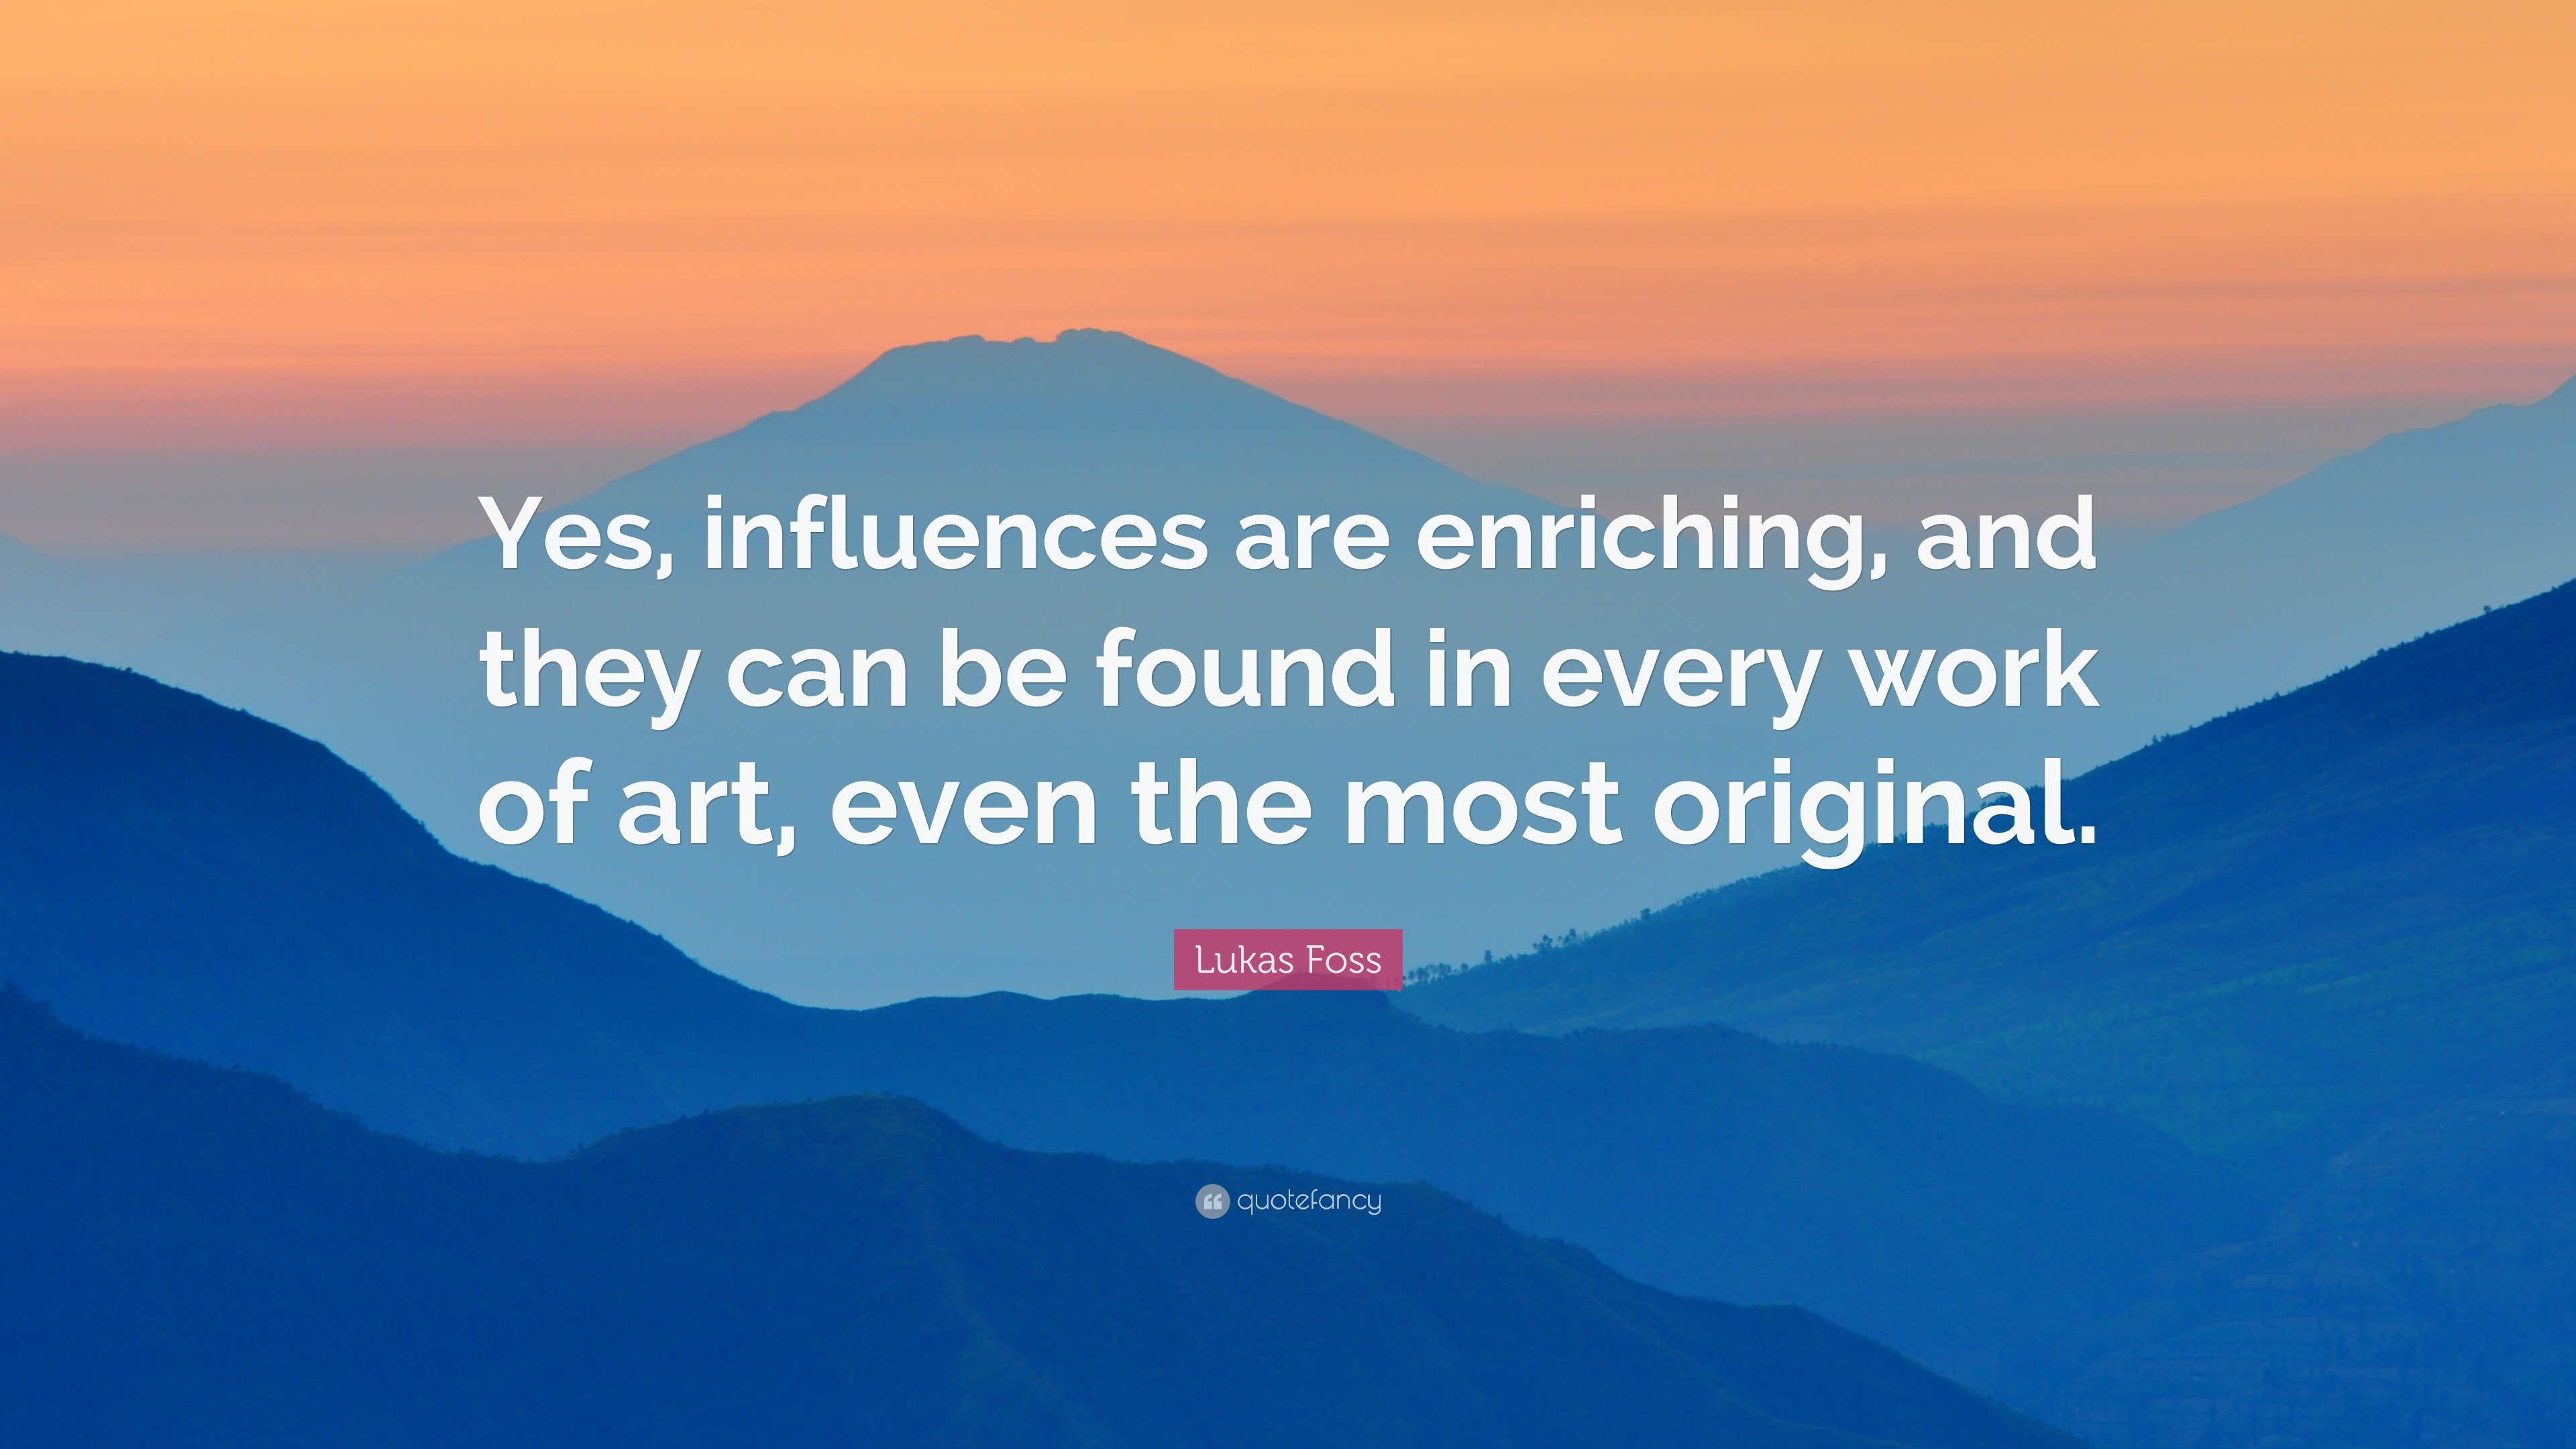 Lukas Foss Quote: “Yes, influences are enriching, and they can be found ...